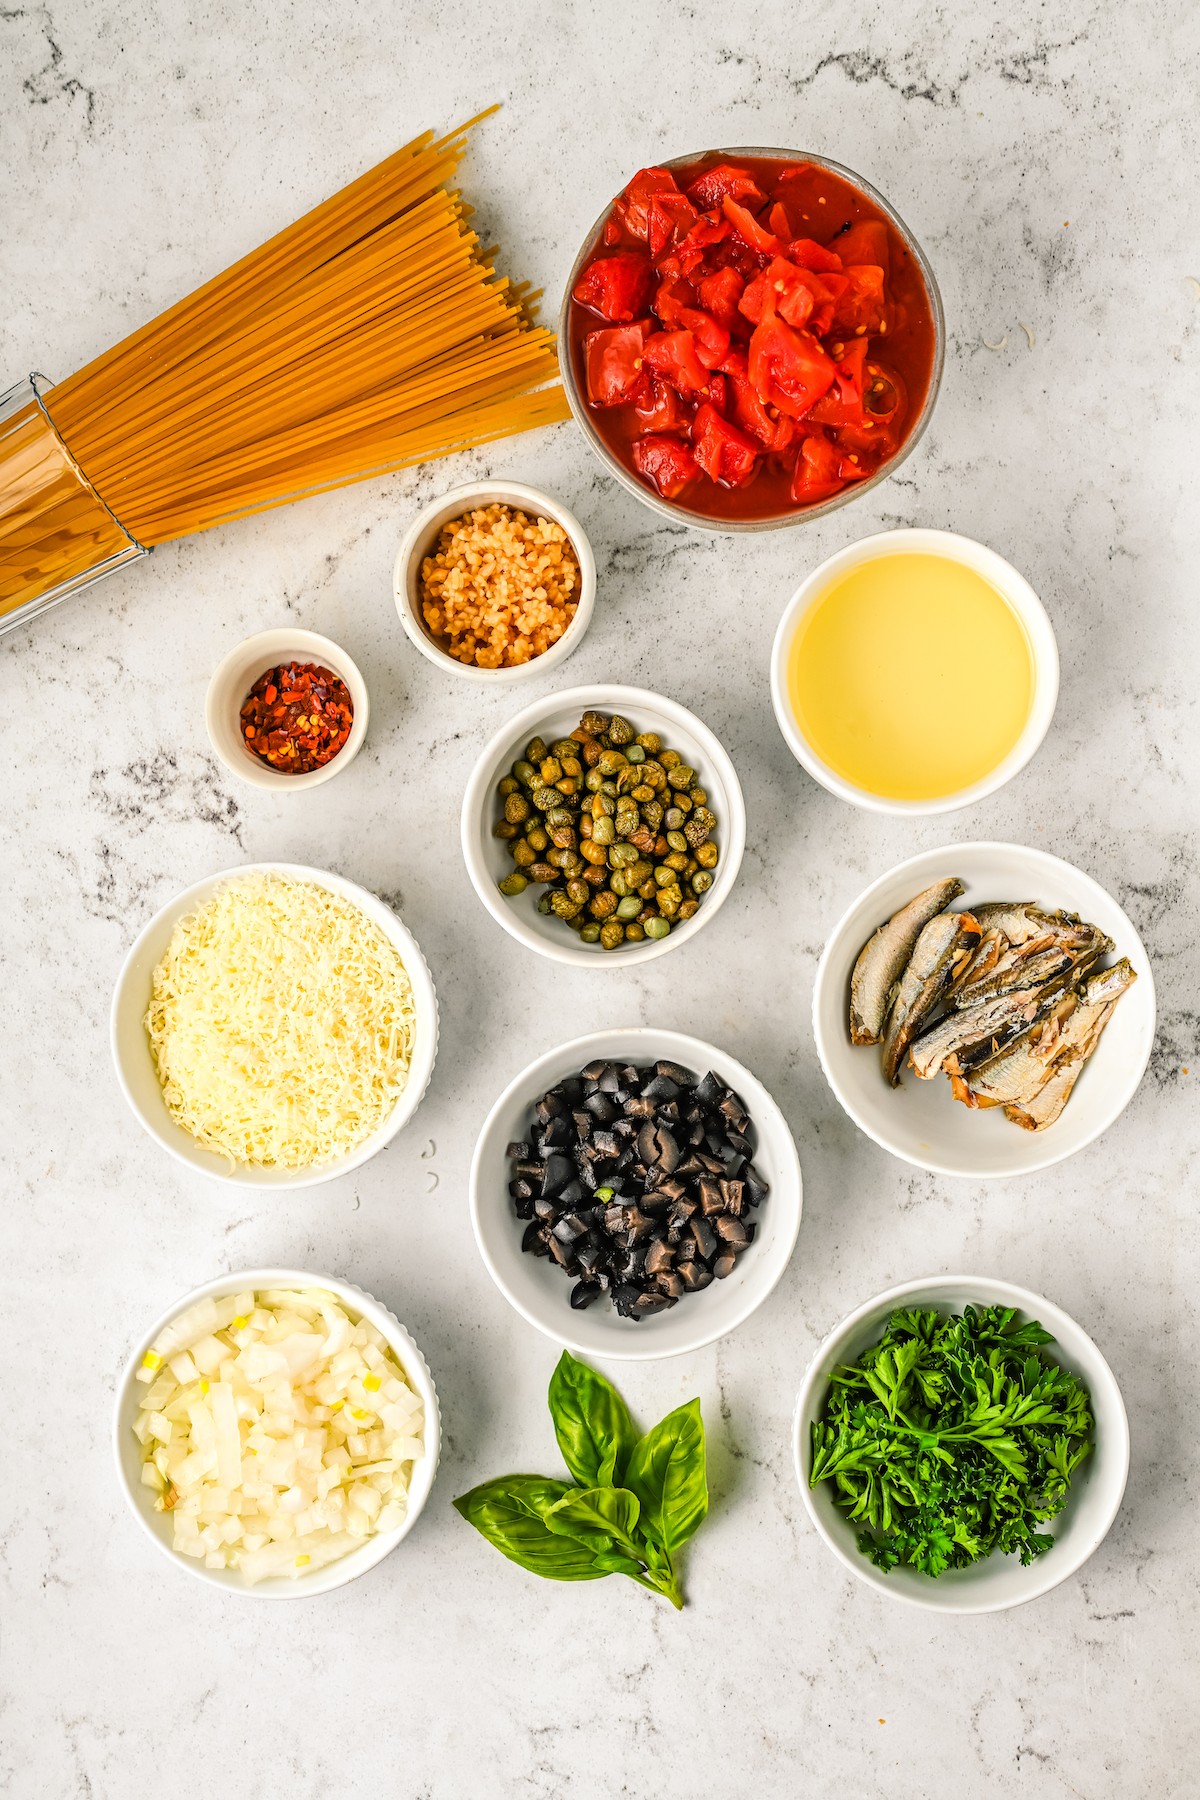 The ingredients for spaghetti puttanesca, measured and arranged on a work surface.